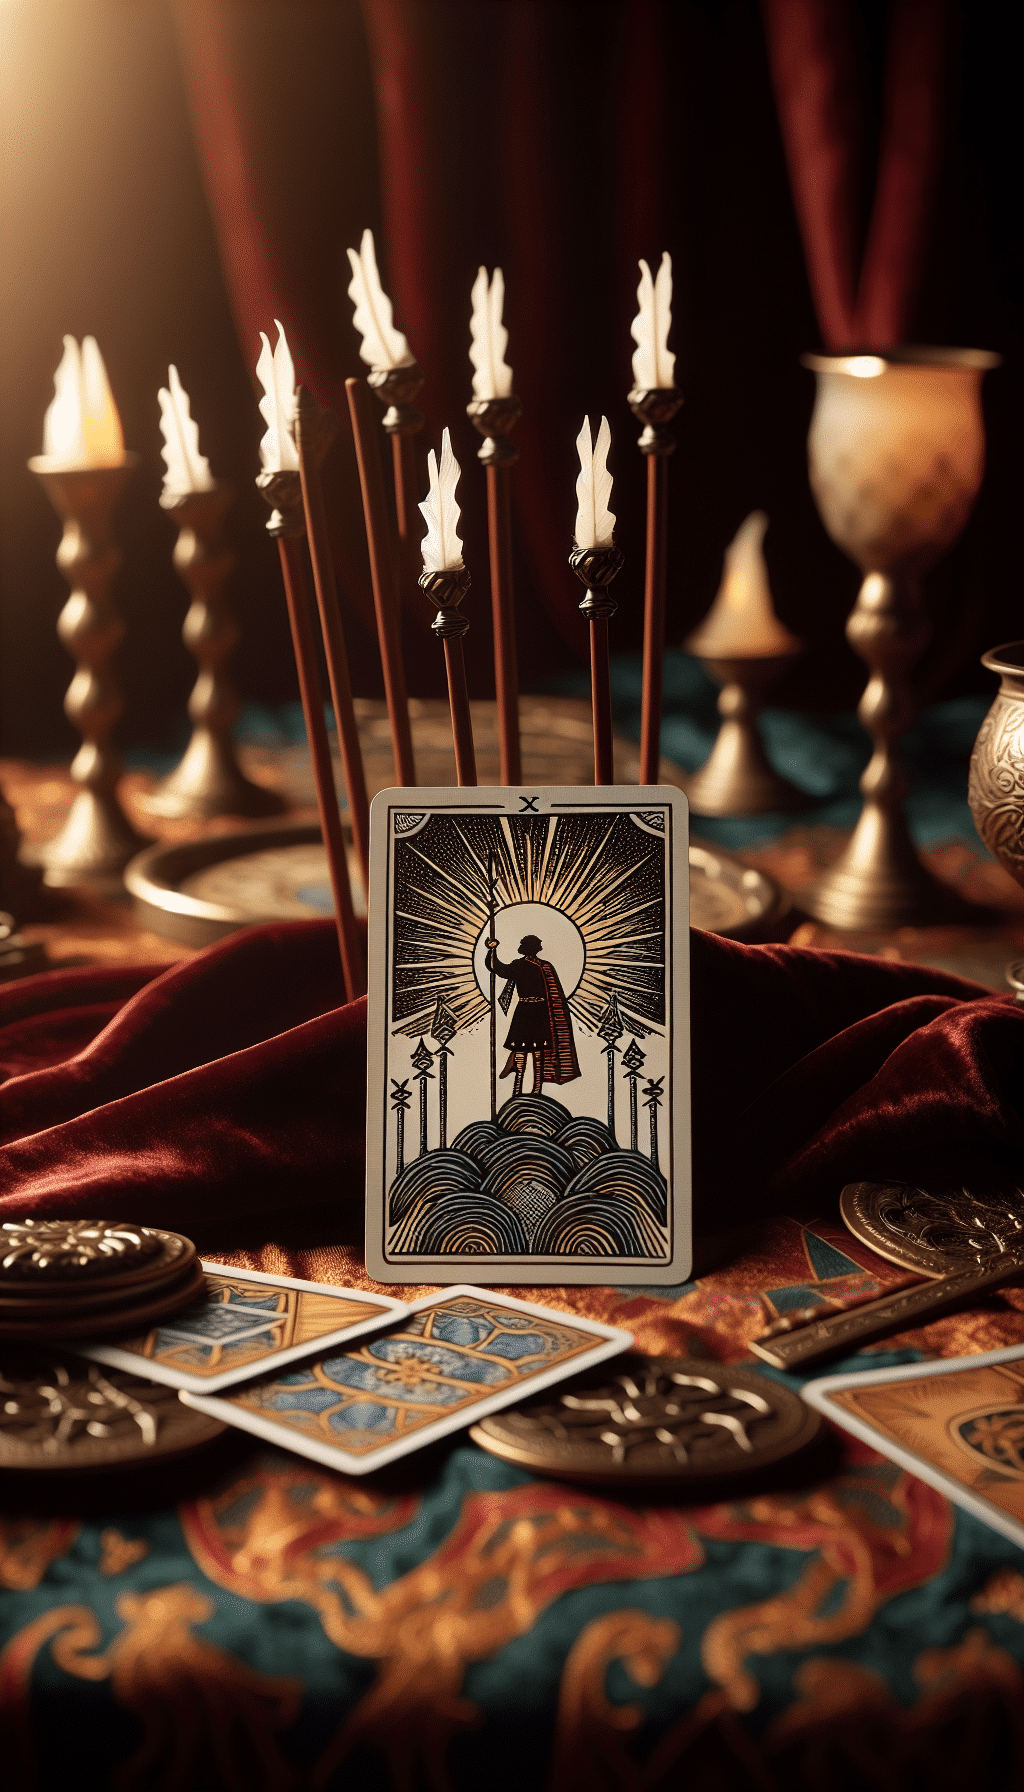 Seven of Wands: Overcoming Financial Challenges